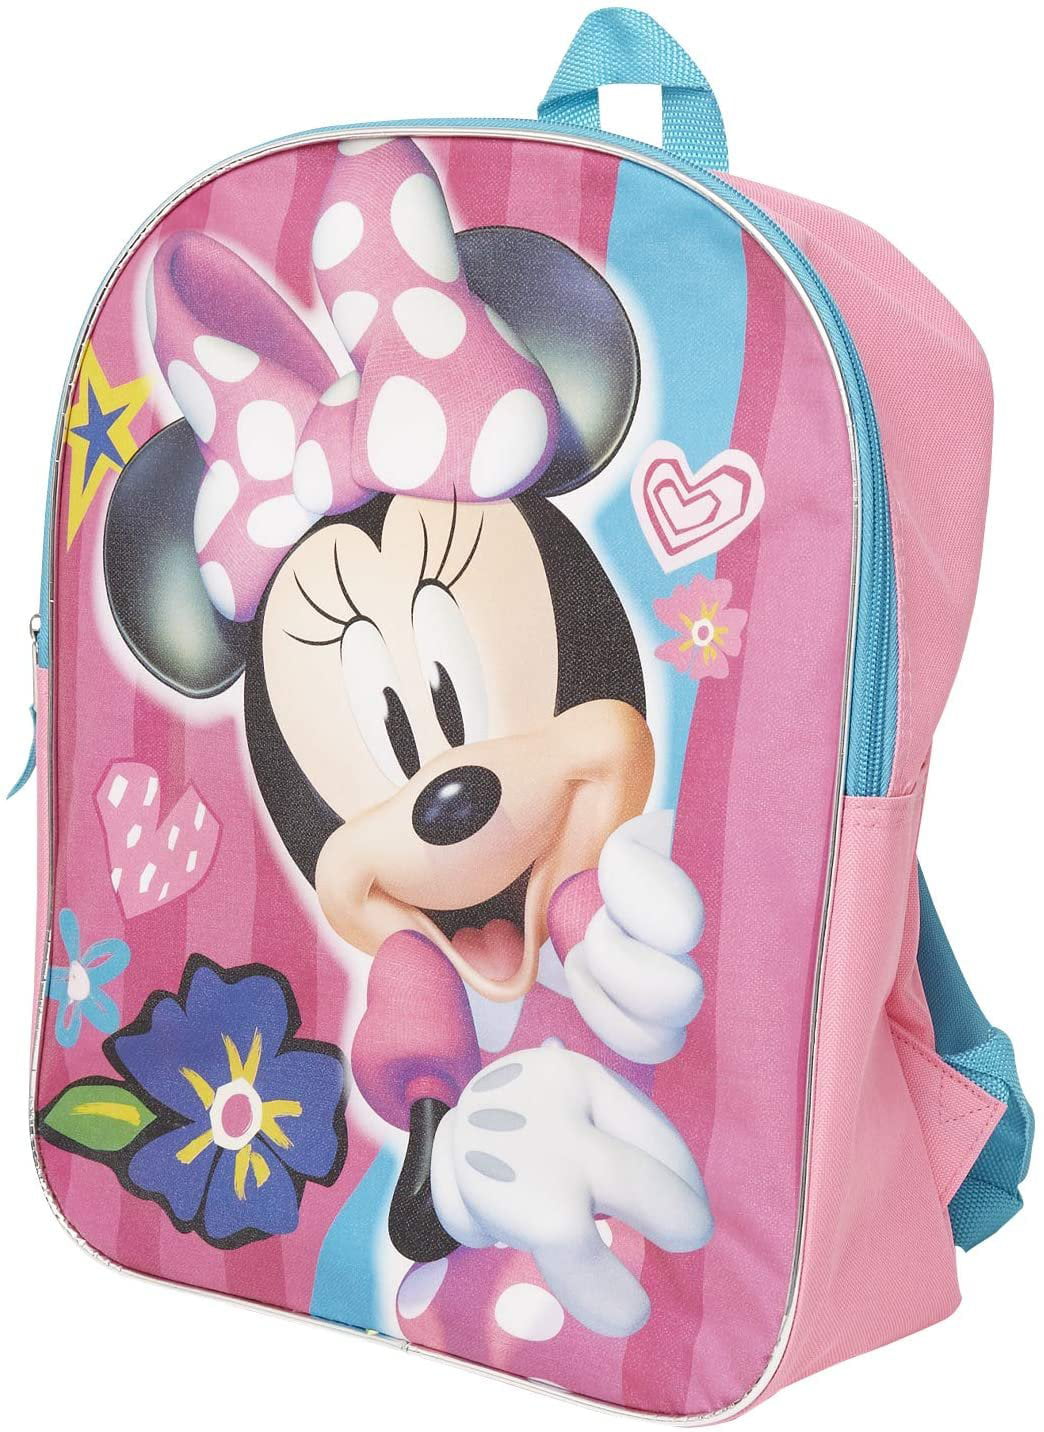 RED GIRLS MINNIE MOUSE BACKPACK 14" MEDIUM 3 D BOW CHRISTMAS GIFT B-DAY DISNEY 